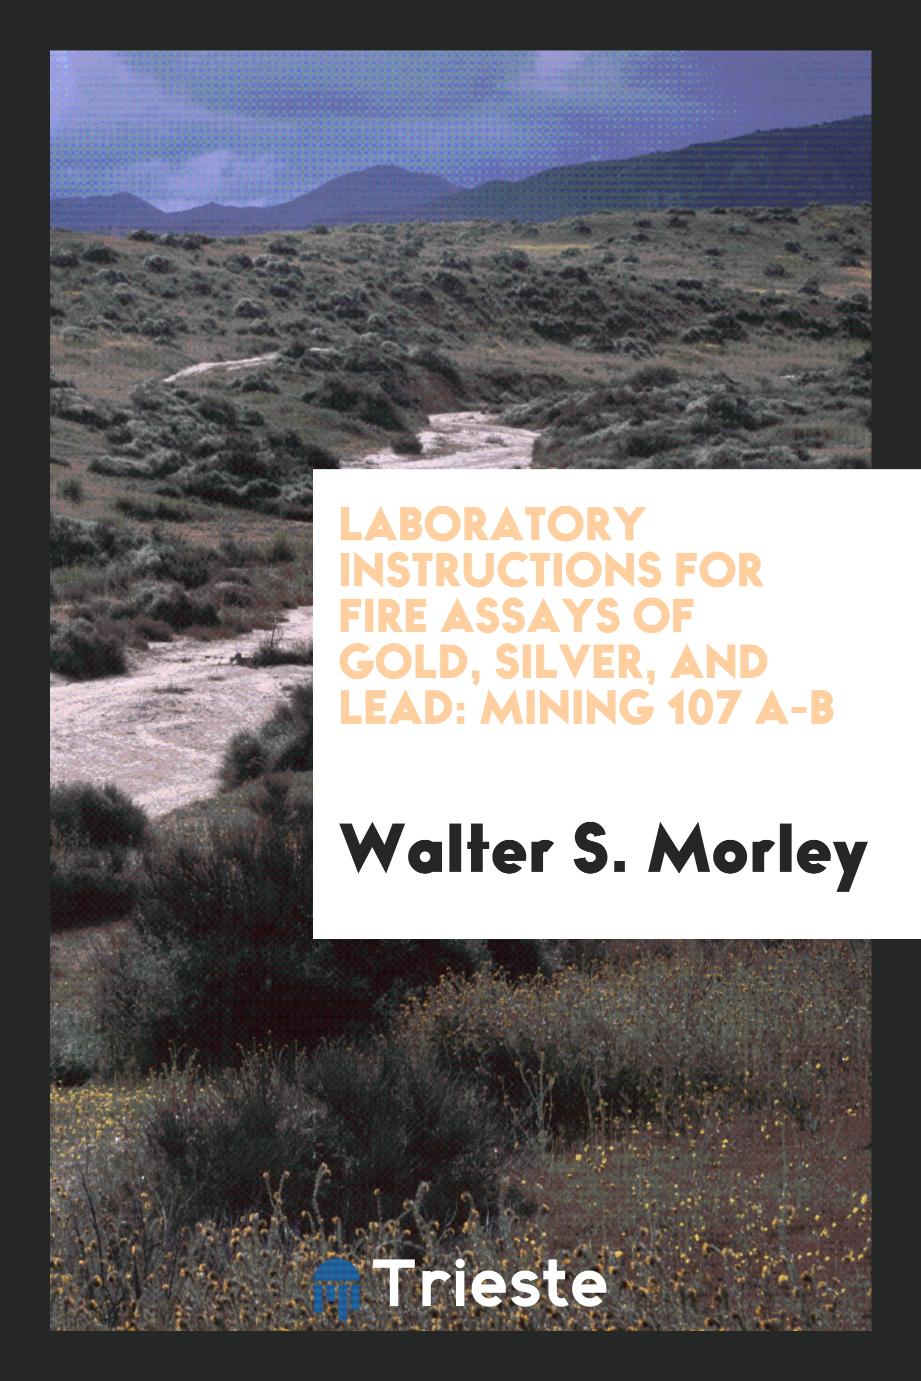 Laboratory Instructions for Fire Assays of Gold, Silver, and Lead: Mining 107 a-b